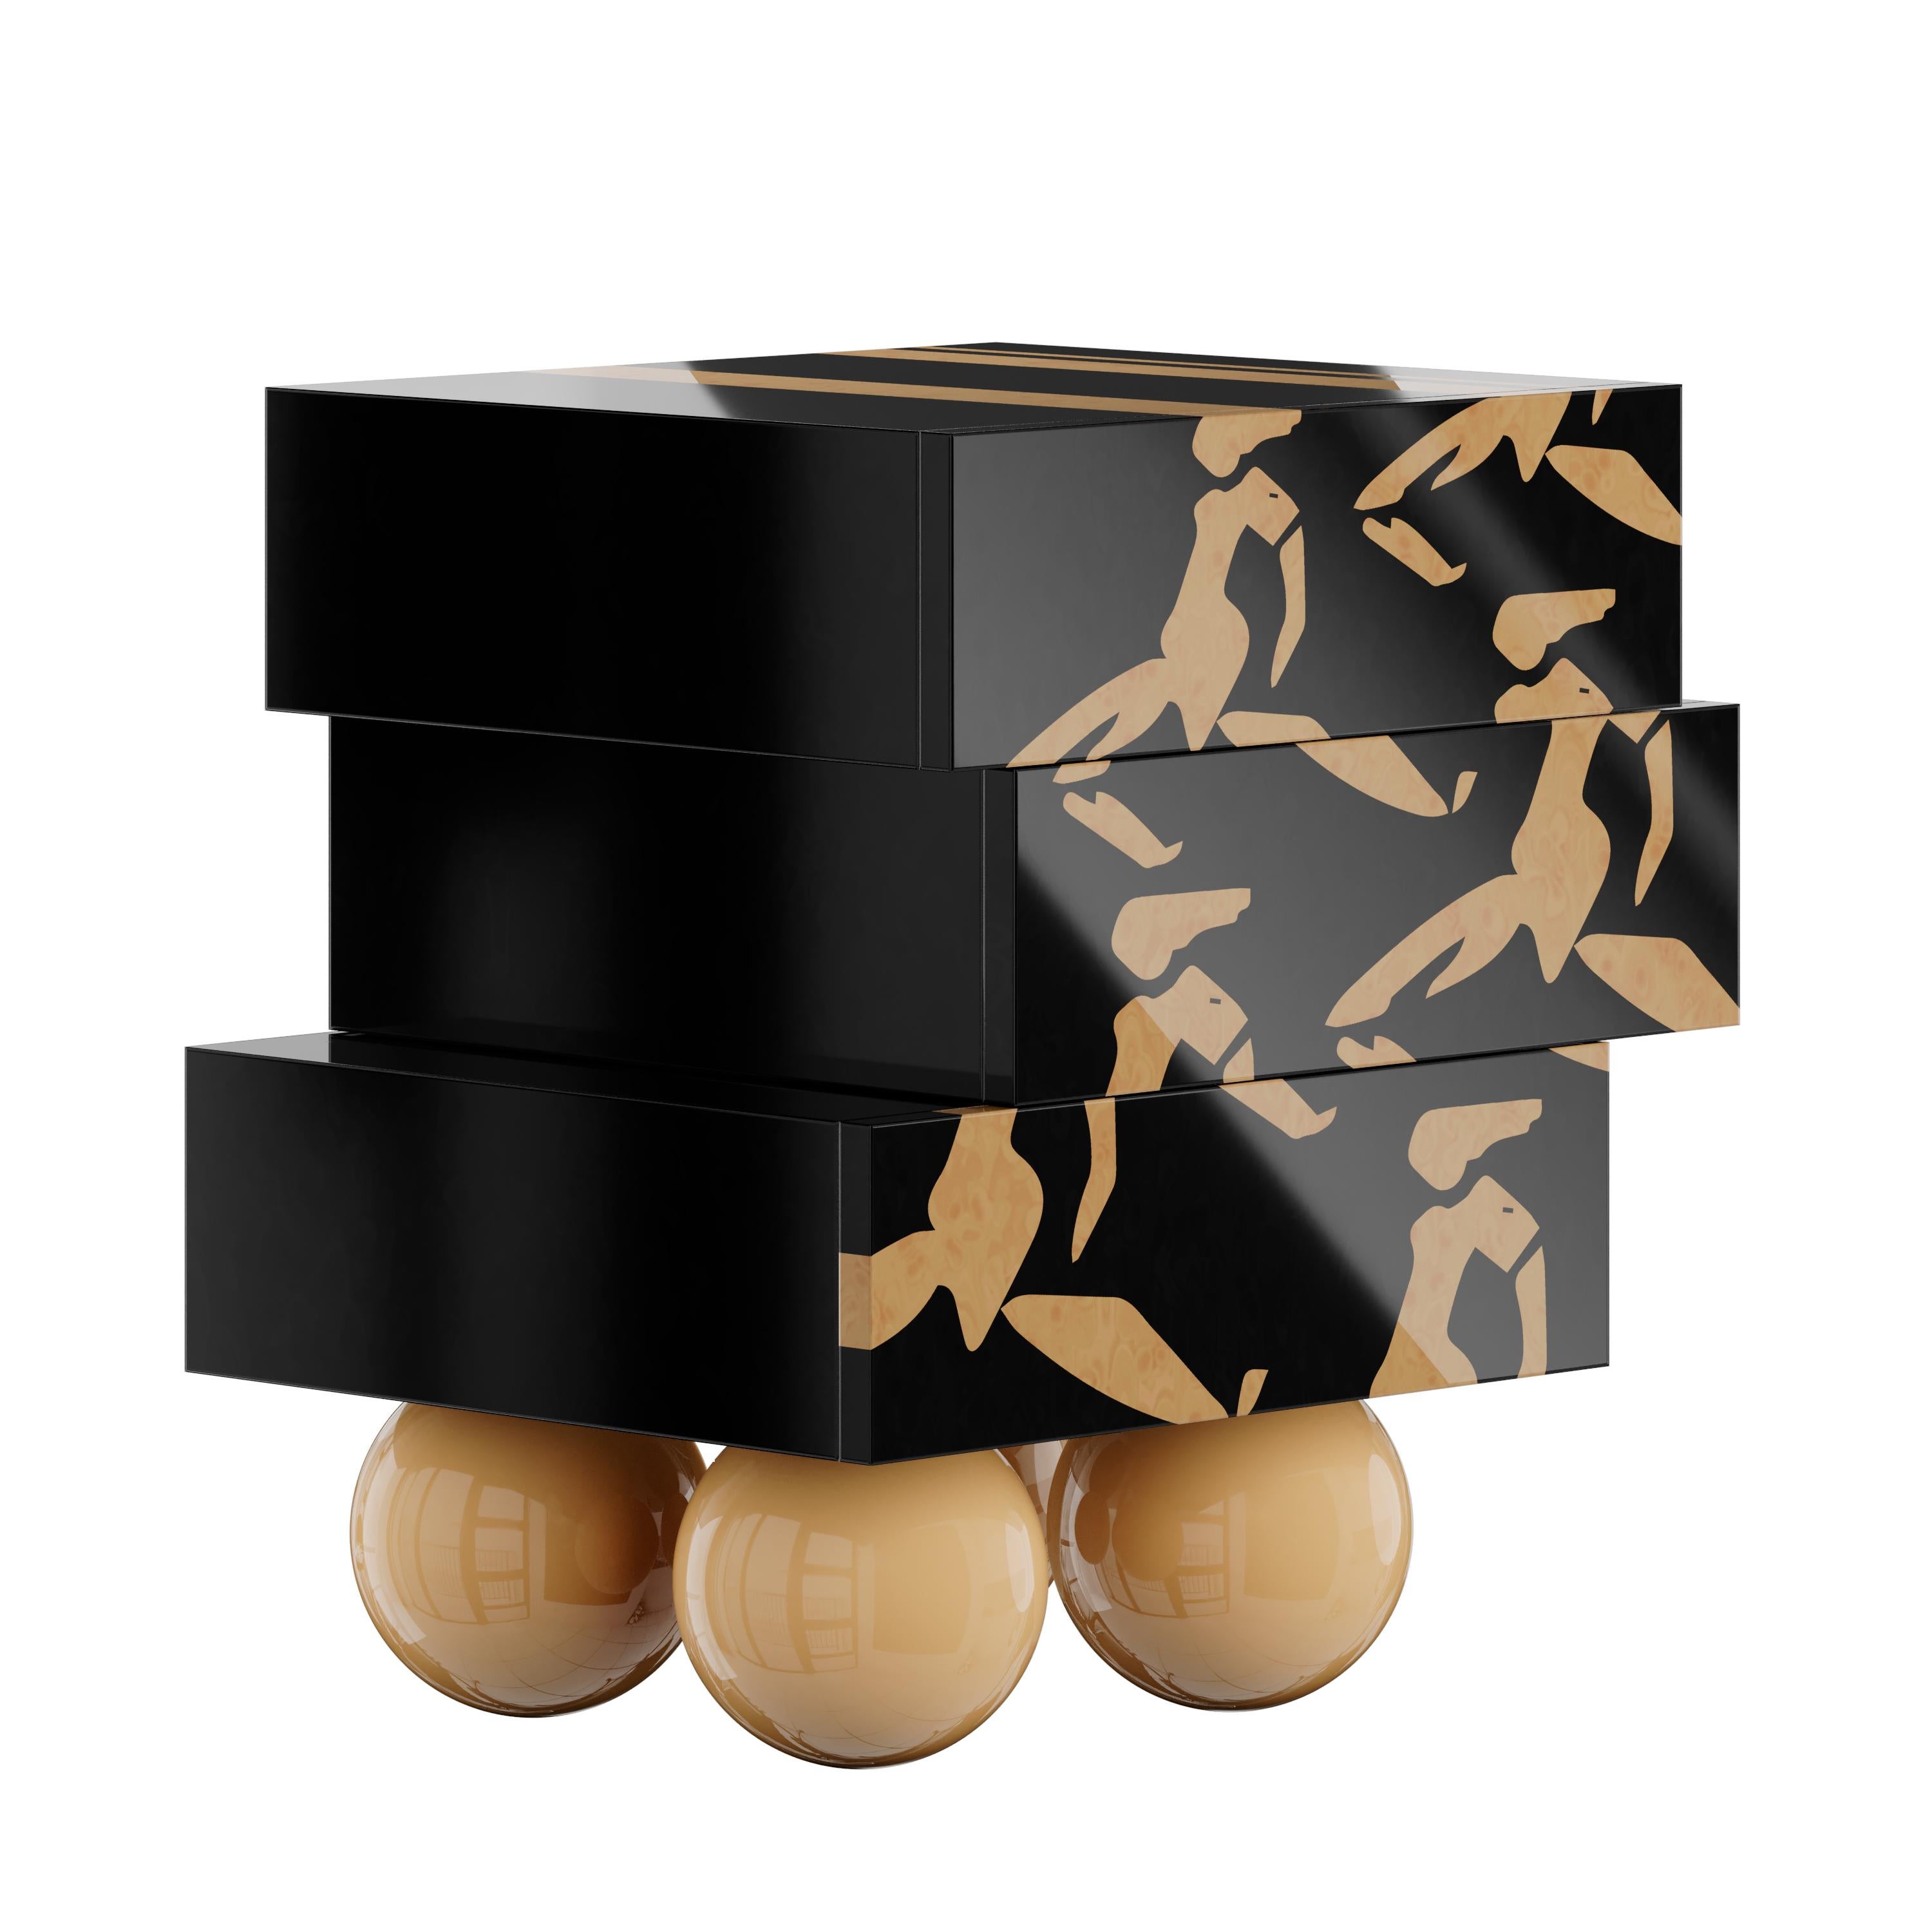 Nice Bedside table is the quintessence of modern design. Its dynamic silhouette features three drawers resting on four legs of wooden spheres. The exceptional geometric design of this modern nightstand allows it to become a must-have piece for your